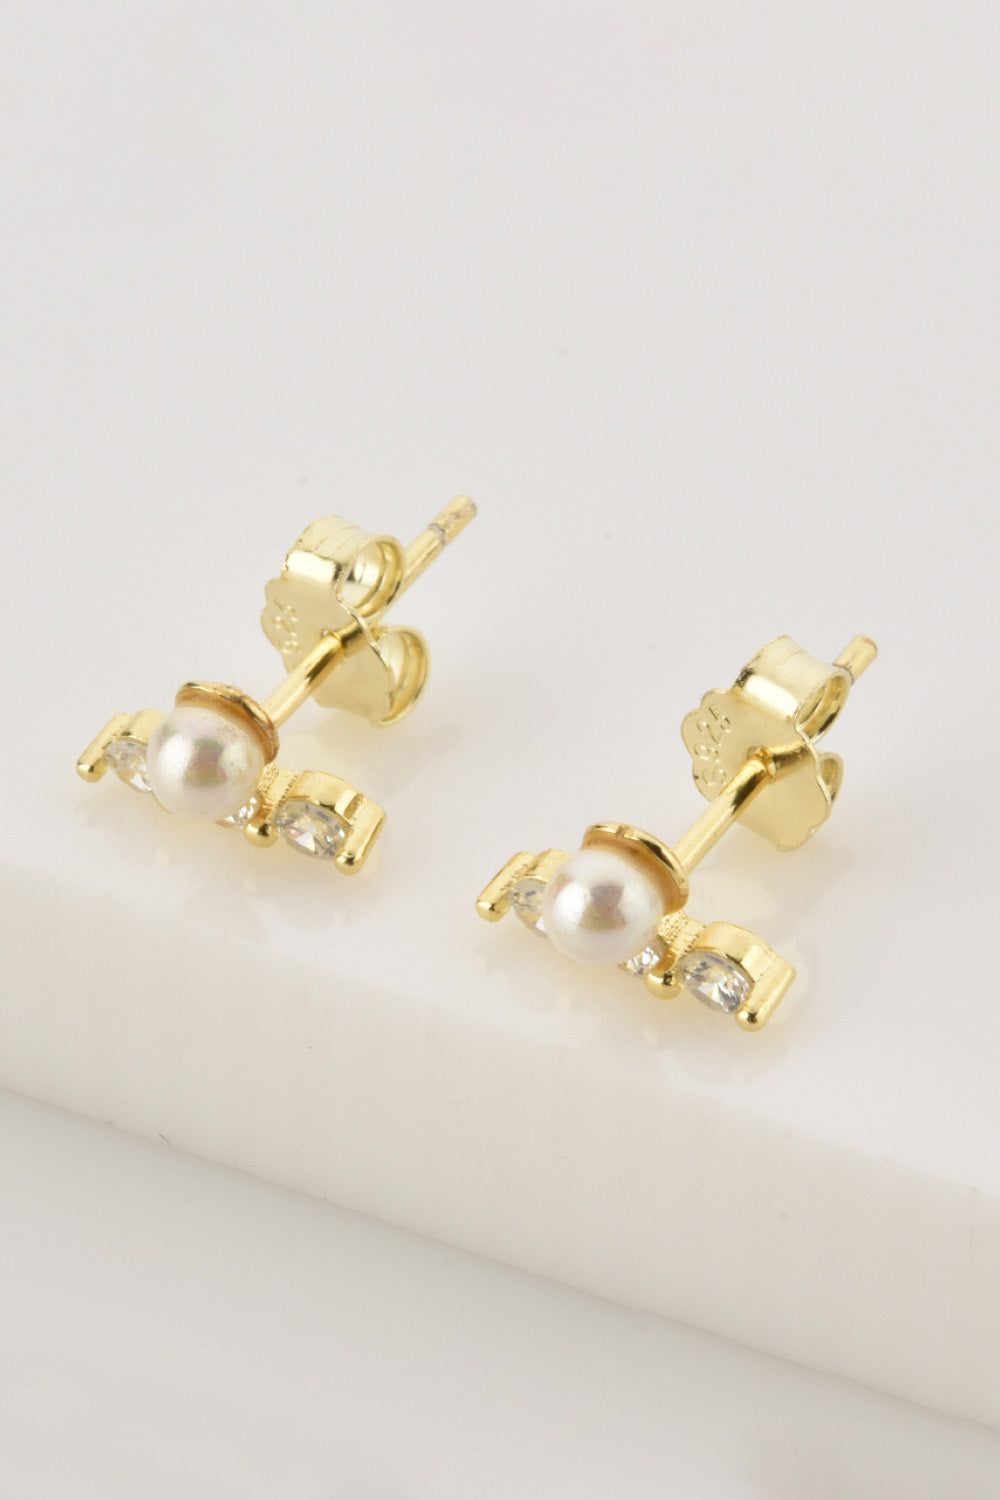 Zircon and Pearl 925 Sterling Silver Stud Earrings - Guy Christopher 